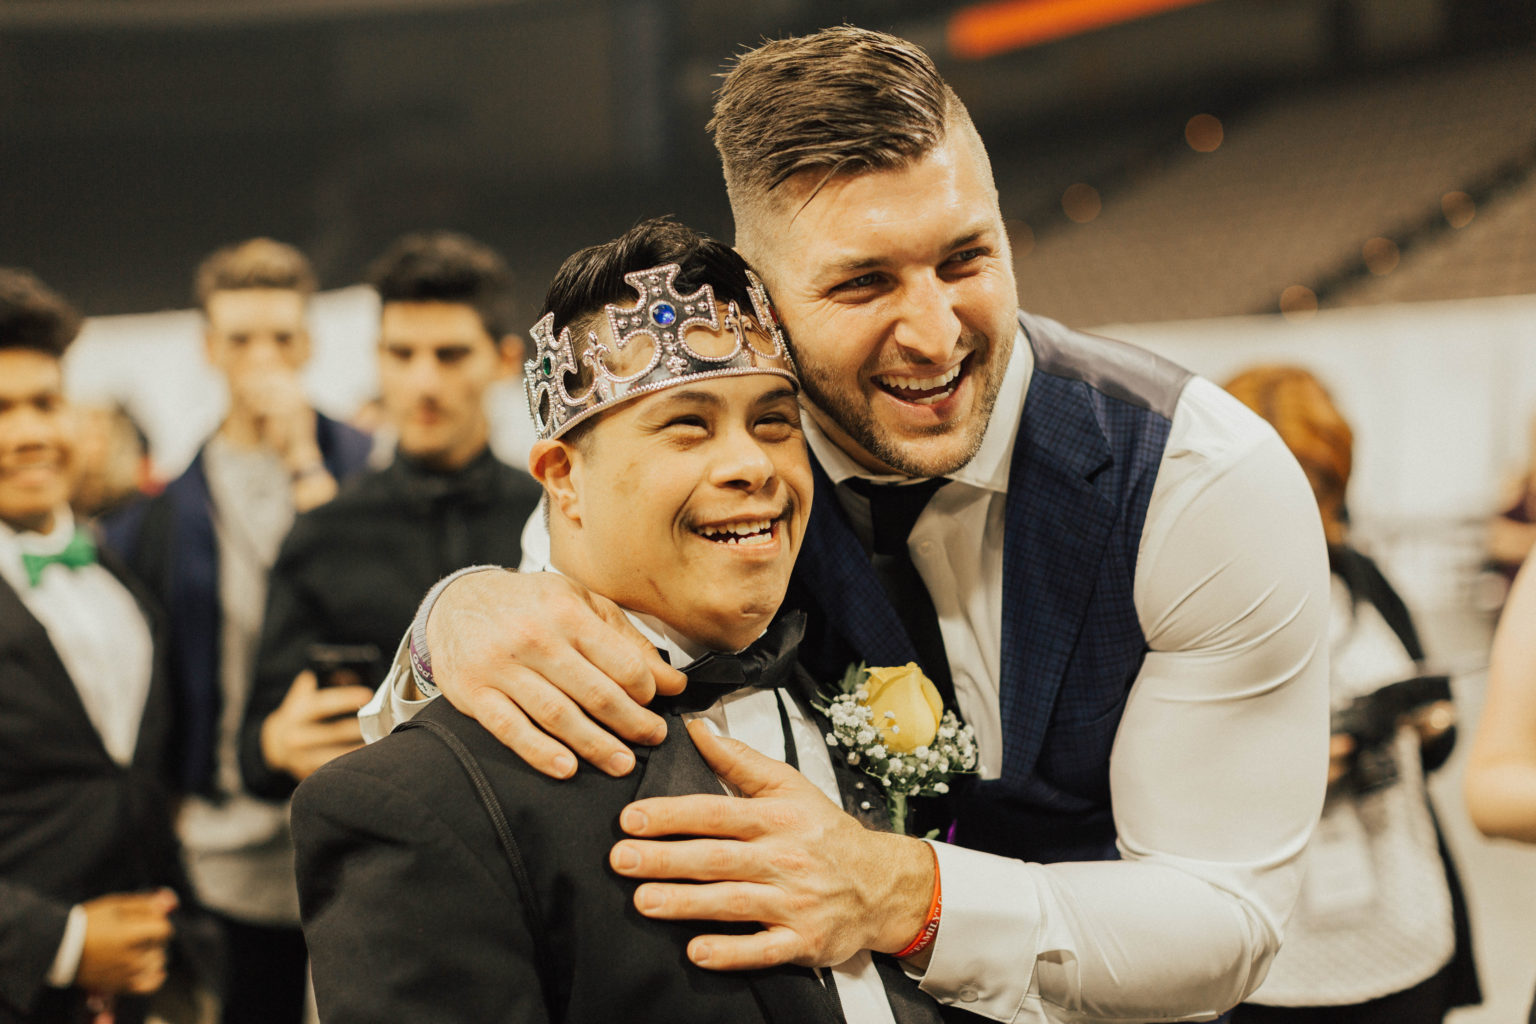 Get to Know What Tim Tebow Foundation Gives to Others